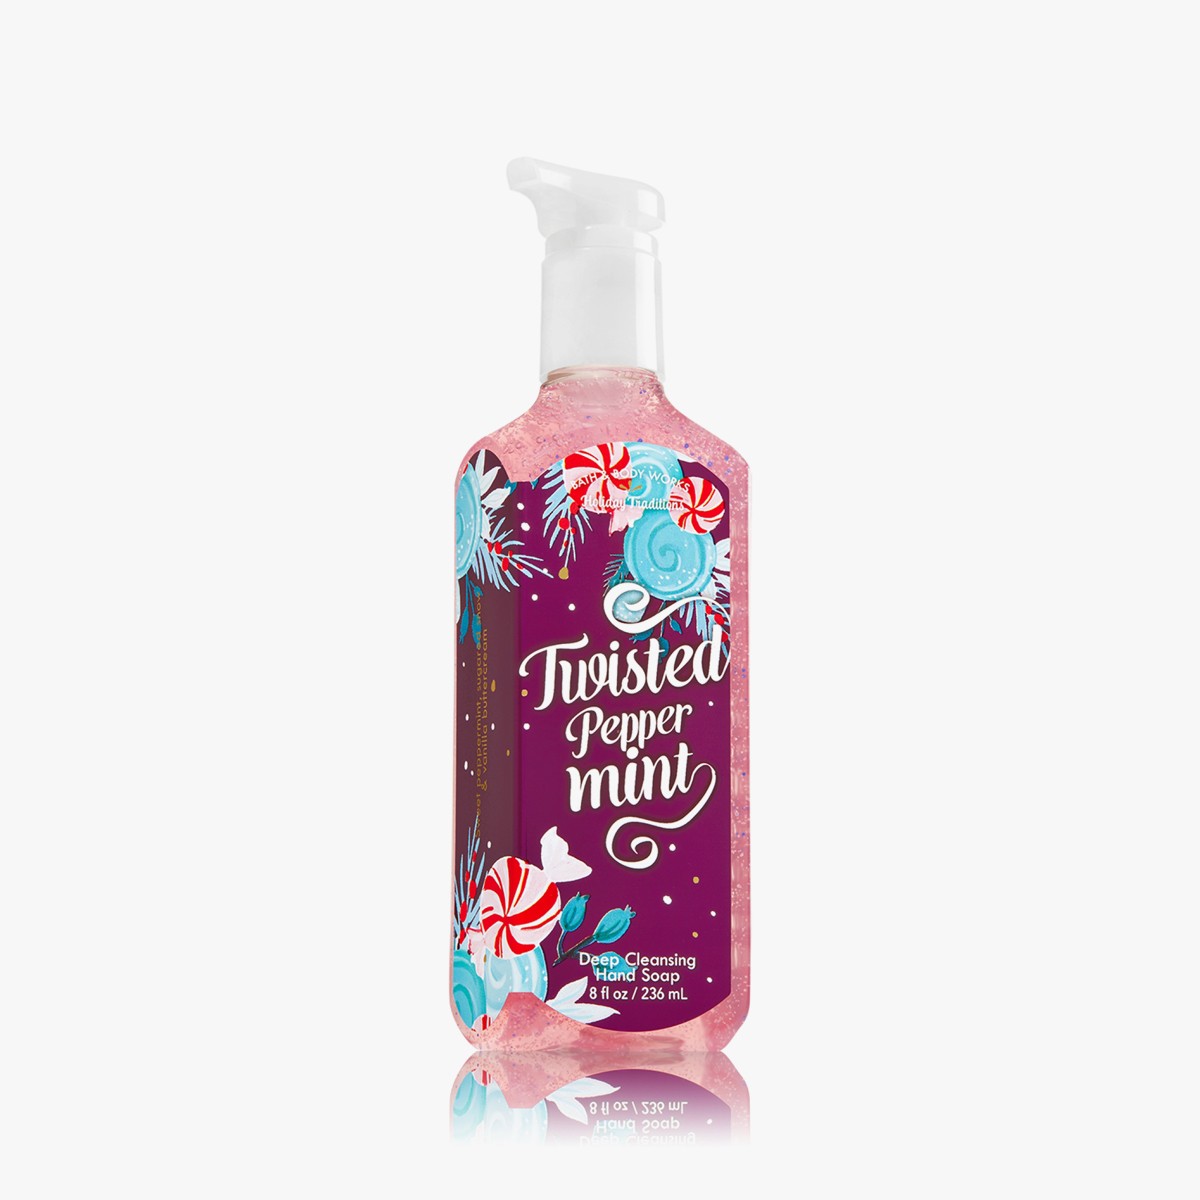 peppermint hand soap